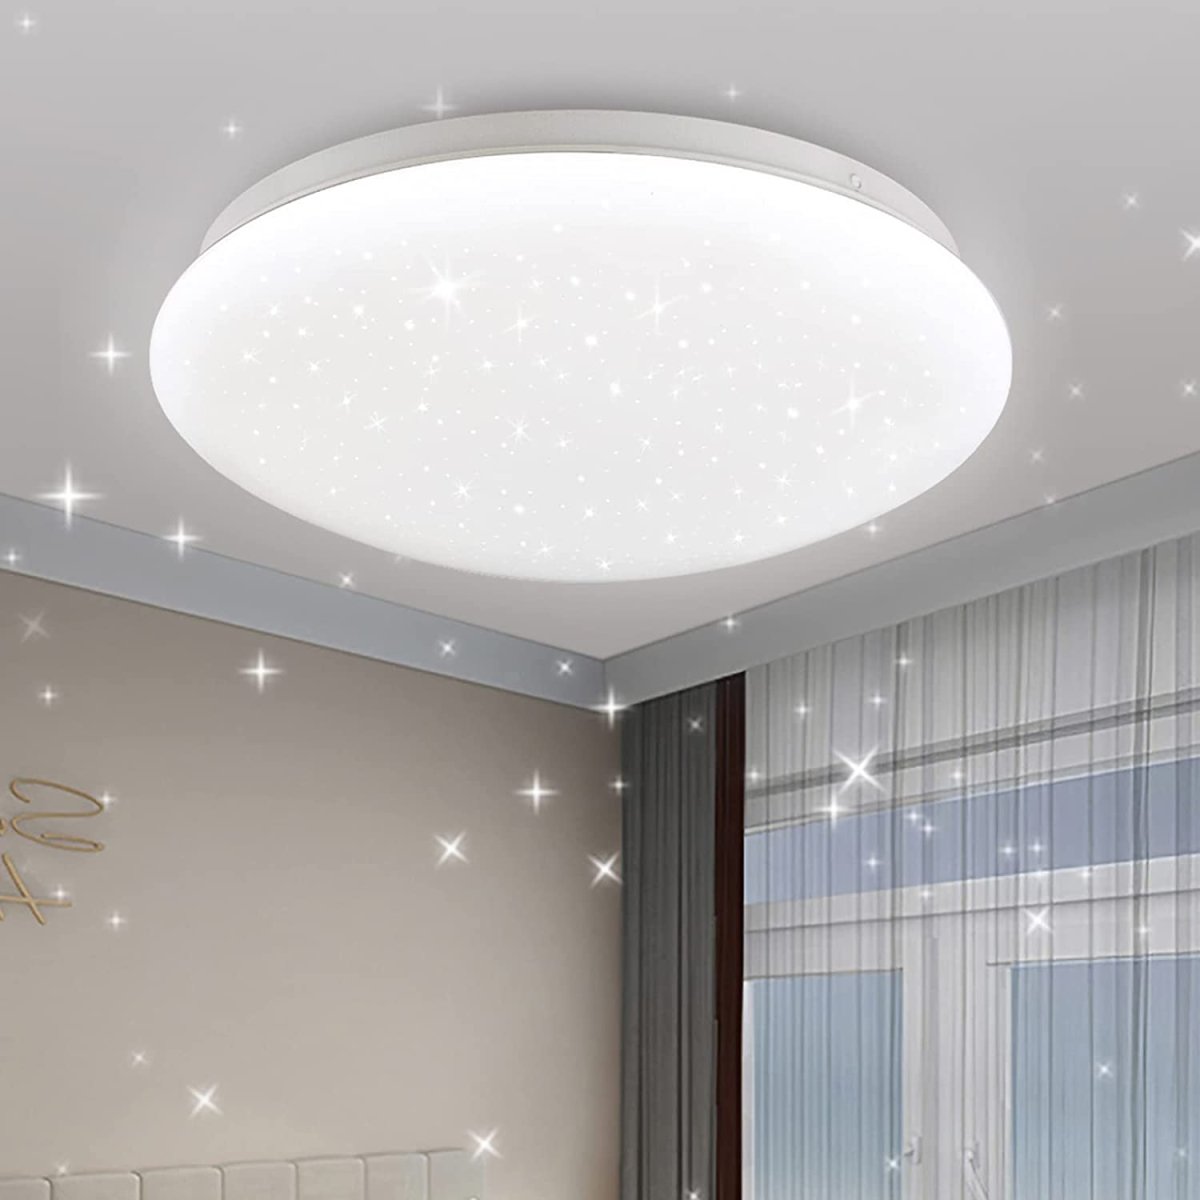 DLLT LED Flush Mount Ceiling Light- 15W Modern Round Ceiling Lamp, Close to Ceiling Lights Fixture 11.4 Inch Daylight 6500K for Bedroom, Kitchen, Hallway, Stairwell, Garage, 1050LM, White - WS-FPC28-15A 1 | DEPULEY